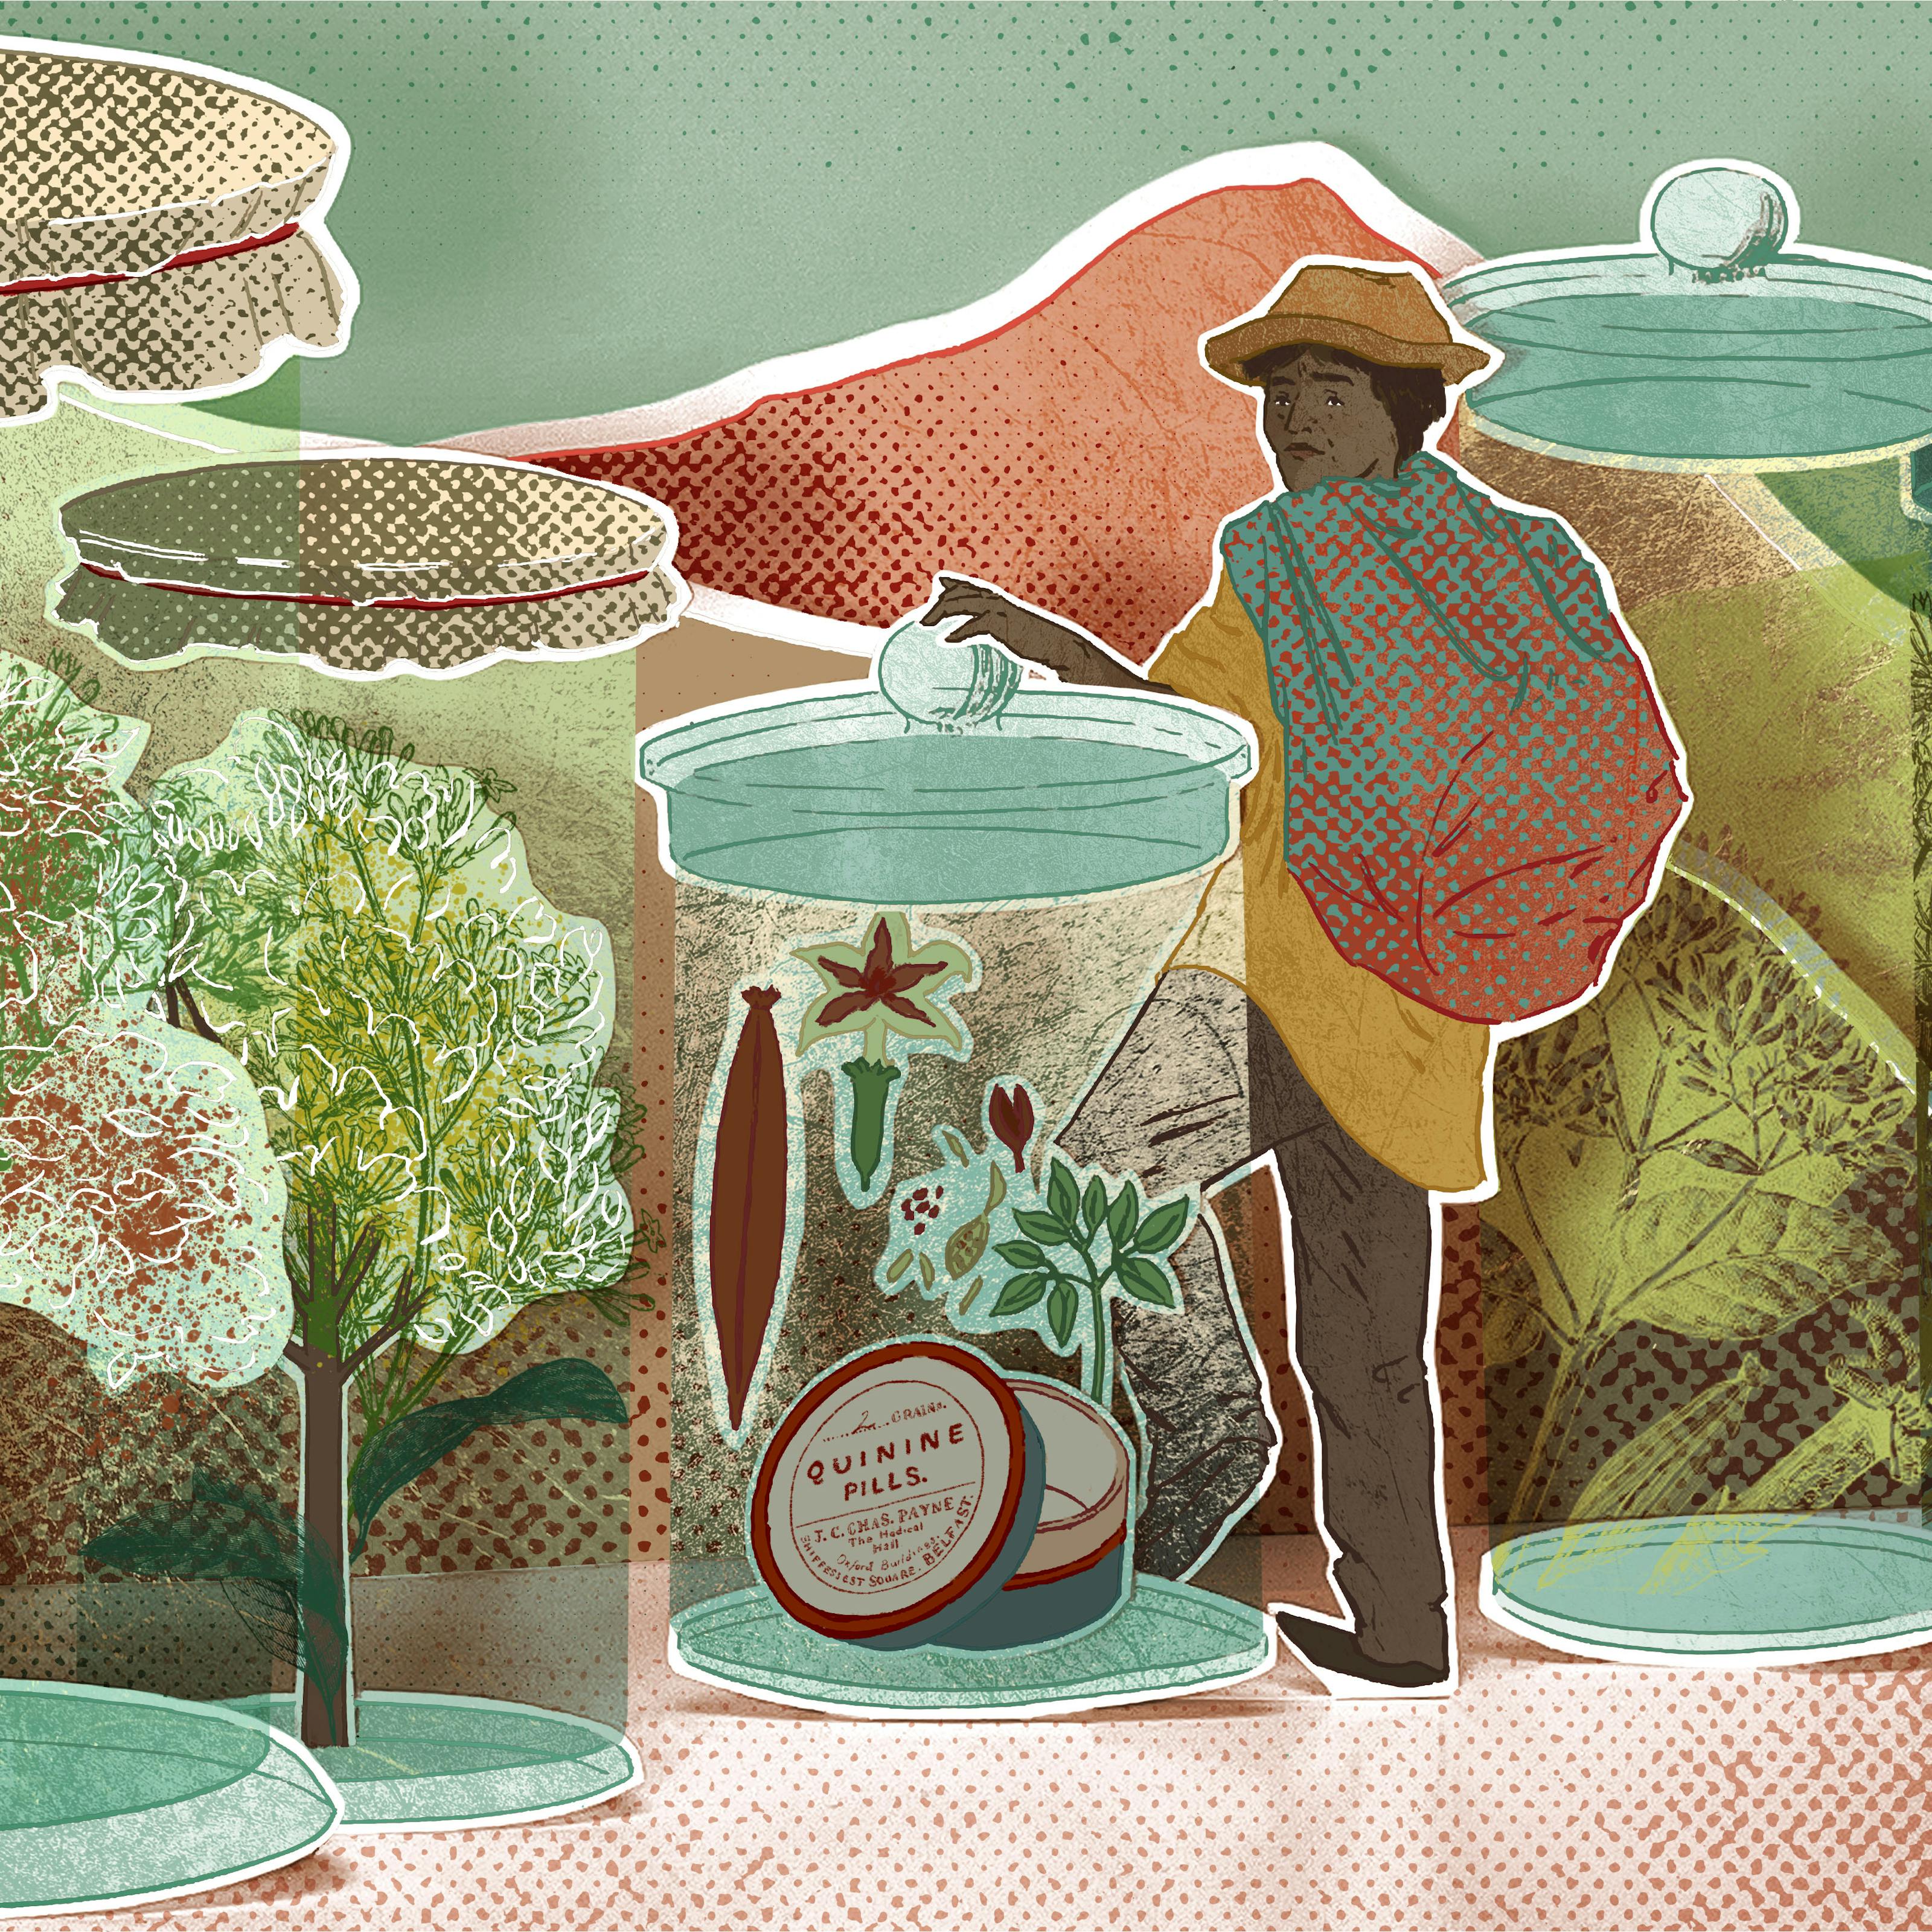 Photograph of a papercut 3D artwork. A man wearing a hat is shown standing between six large glass jars, each containing a different kind of plant. There are red mountains in the background. 